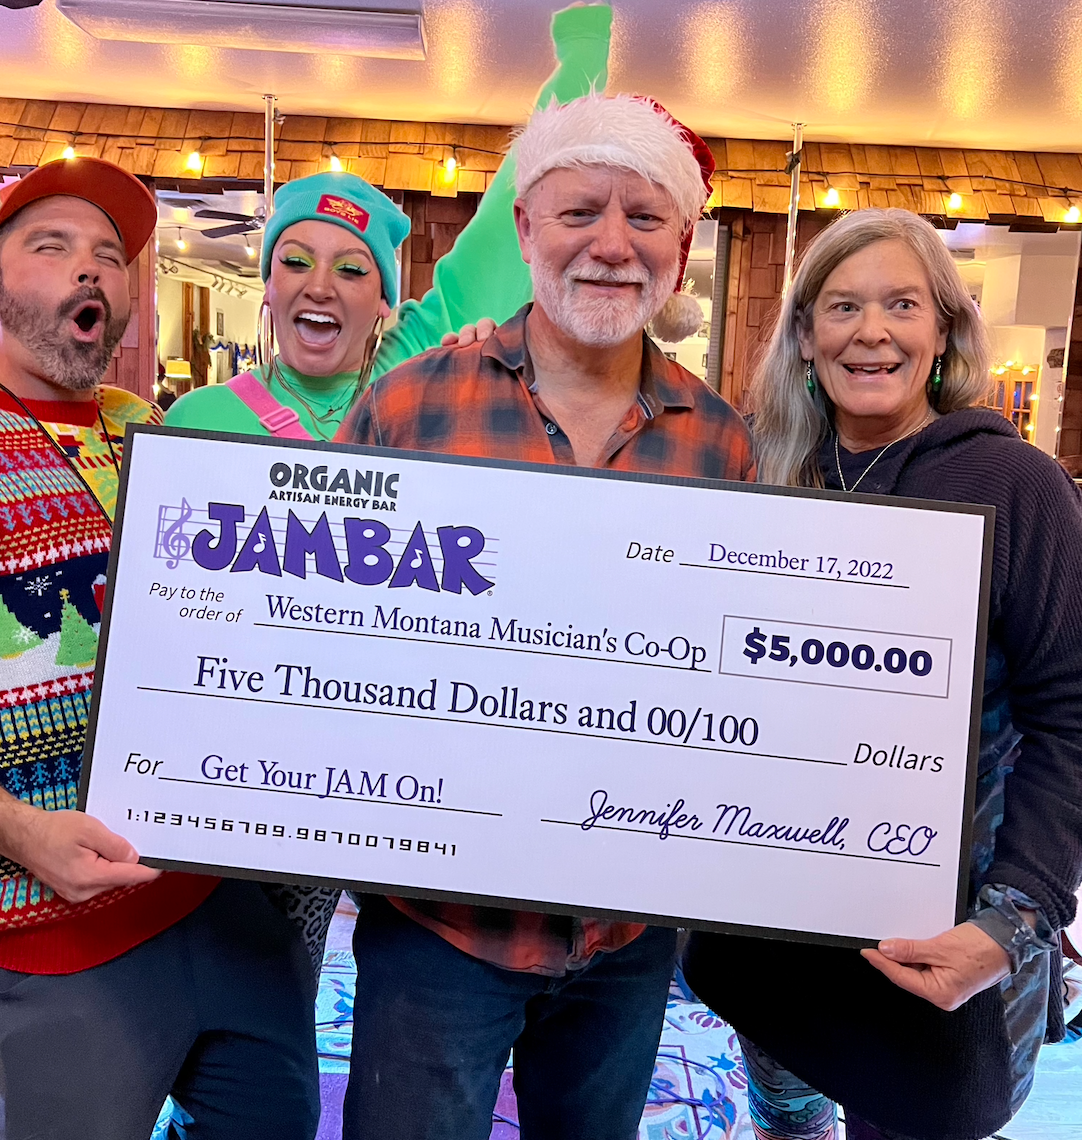 JAMBAR & Wade Holland Deliver a Huge Surprise to the Western Montana Musicians Co-op!